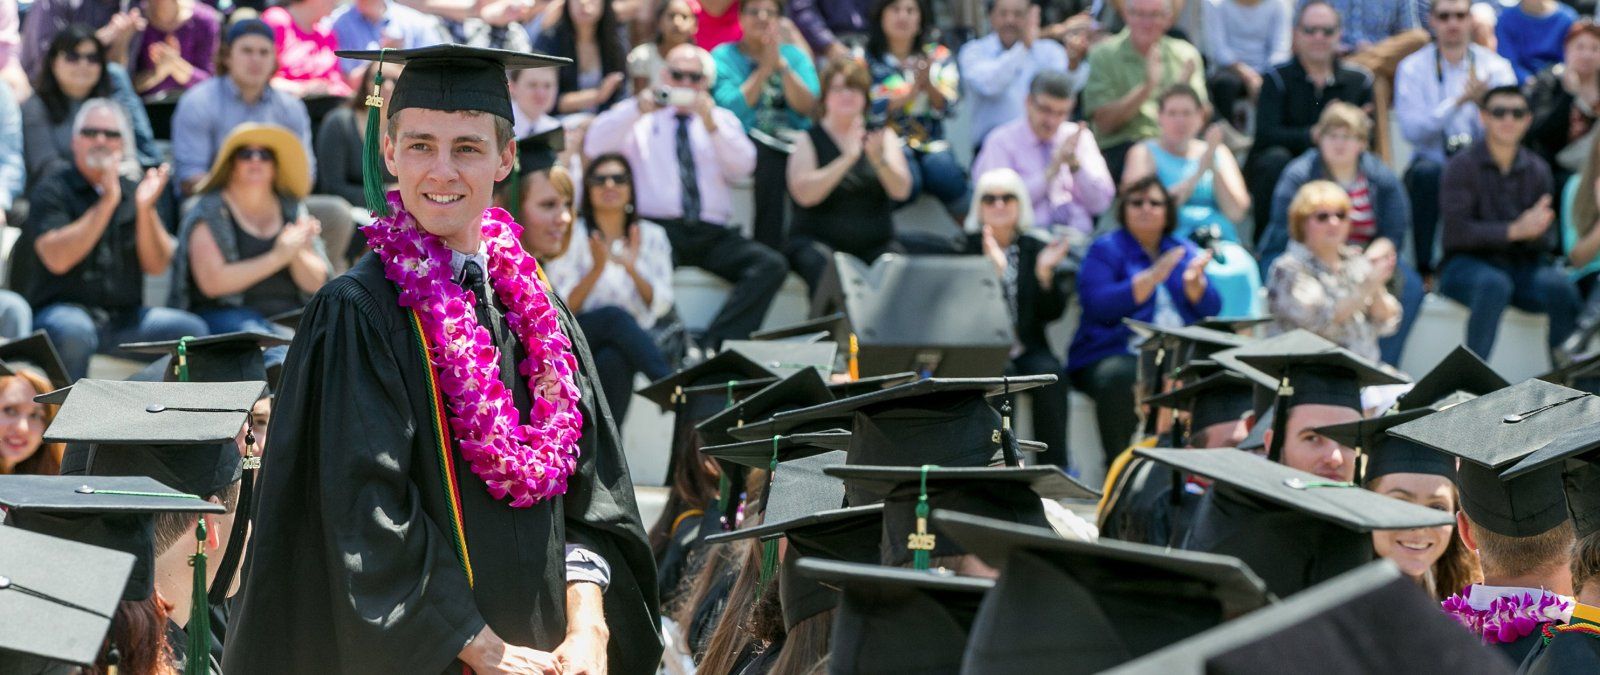 Jordan Thompson stands up to receive his diploma at PLNU's commencement ceremony